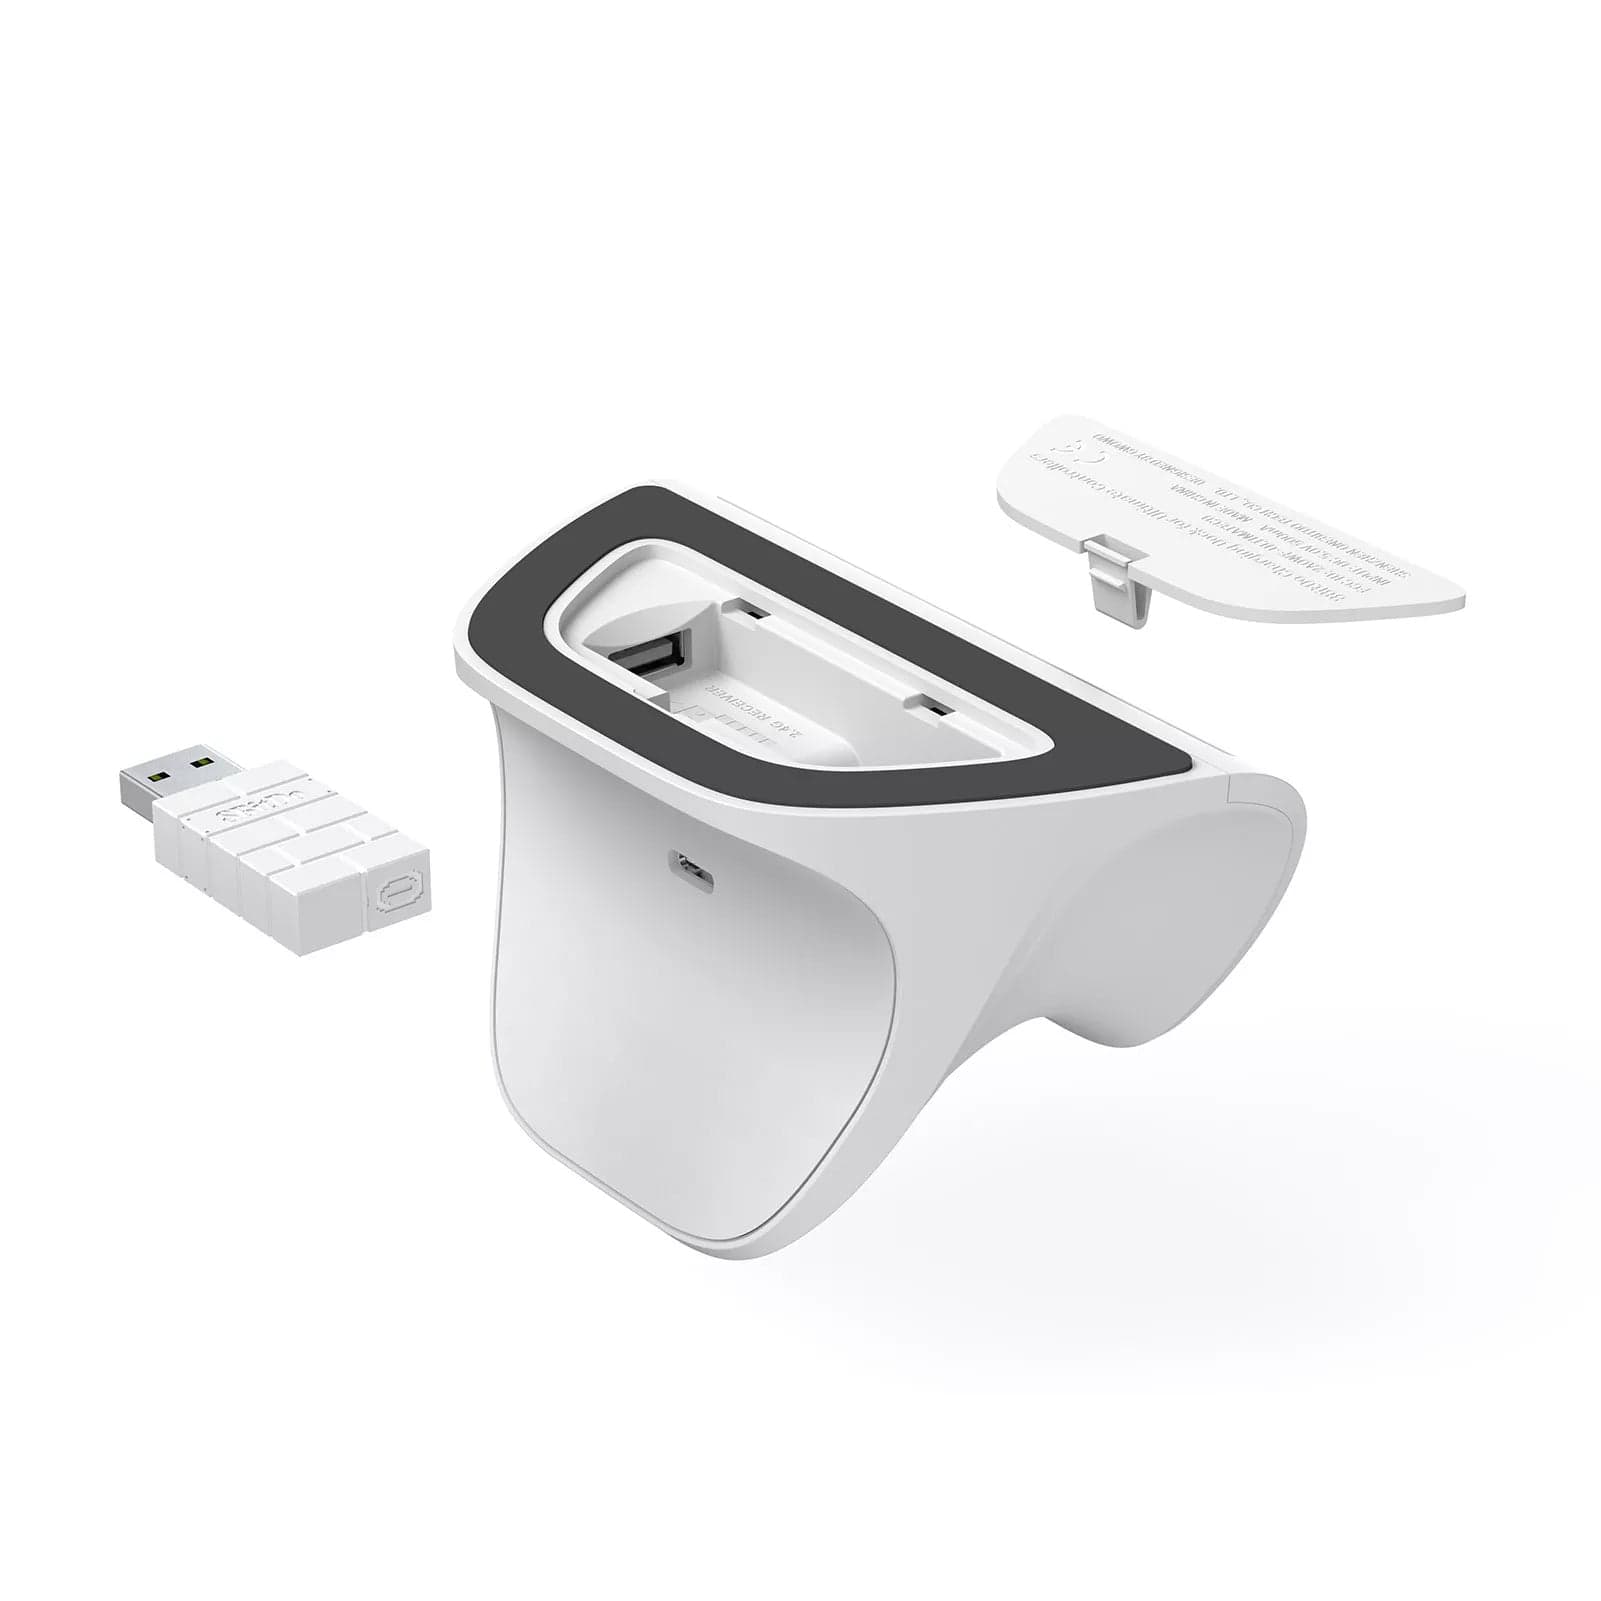 8BitDo Ultimate 2.4G Controller with Charging Dock - White - The Pi Hut